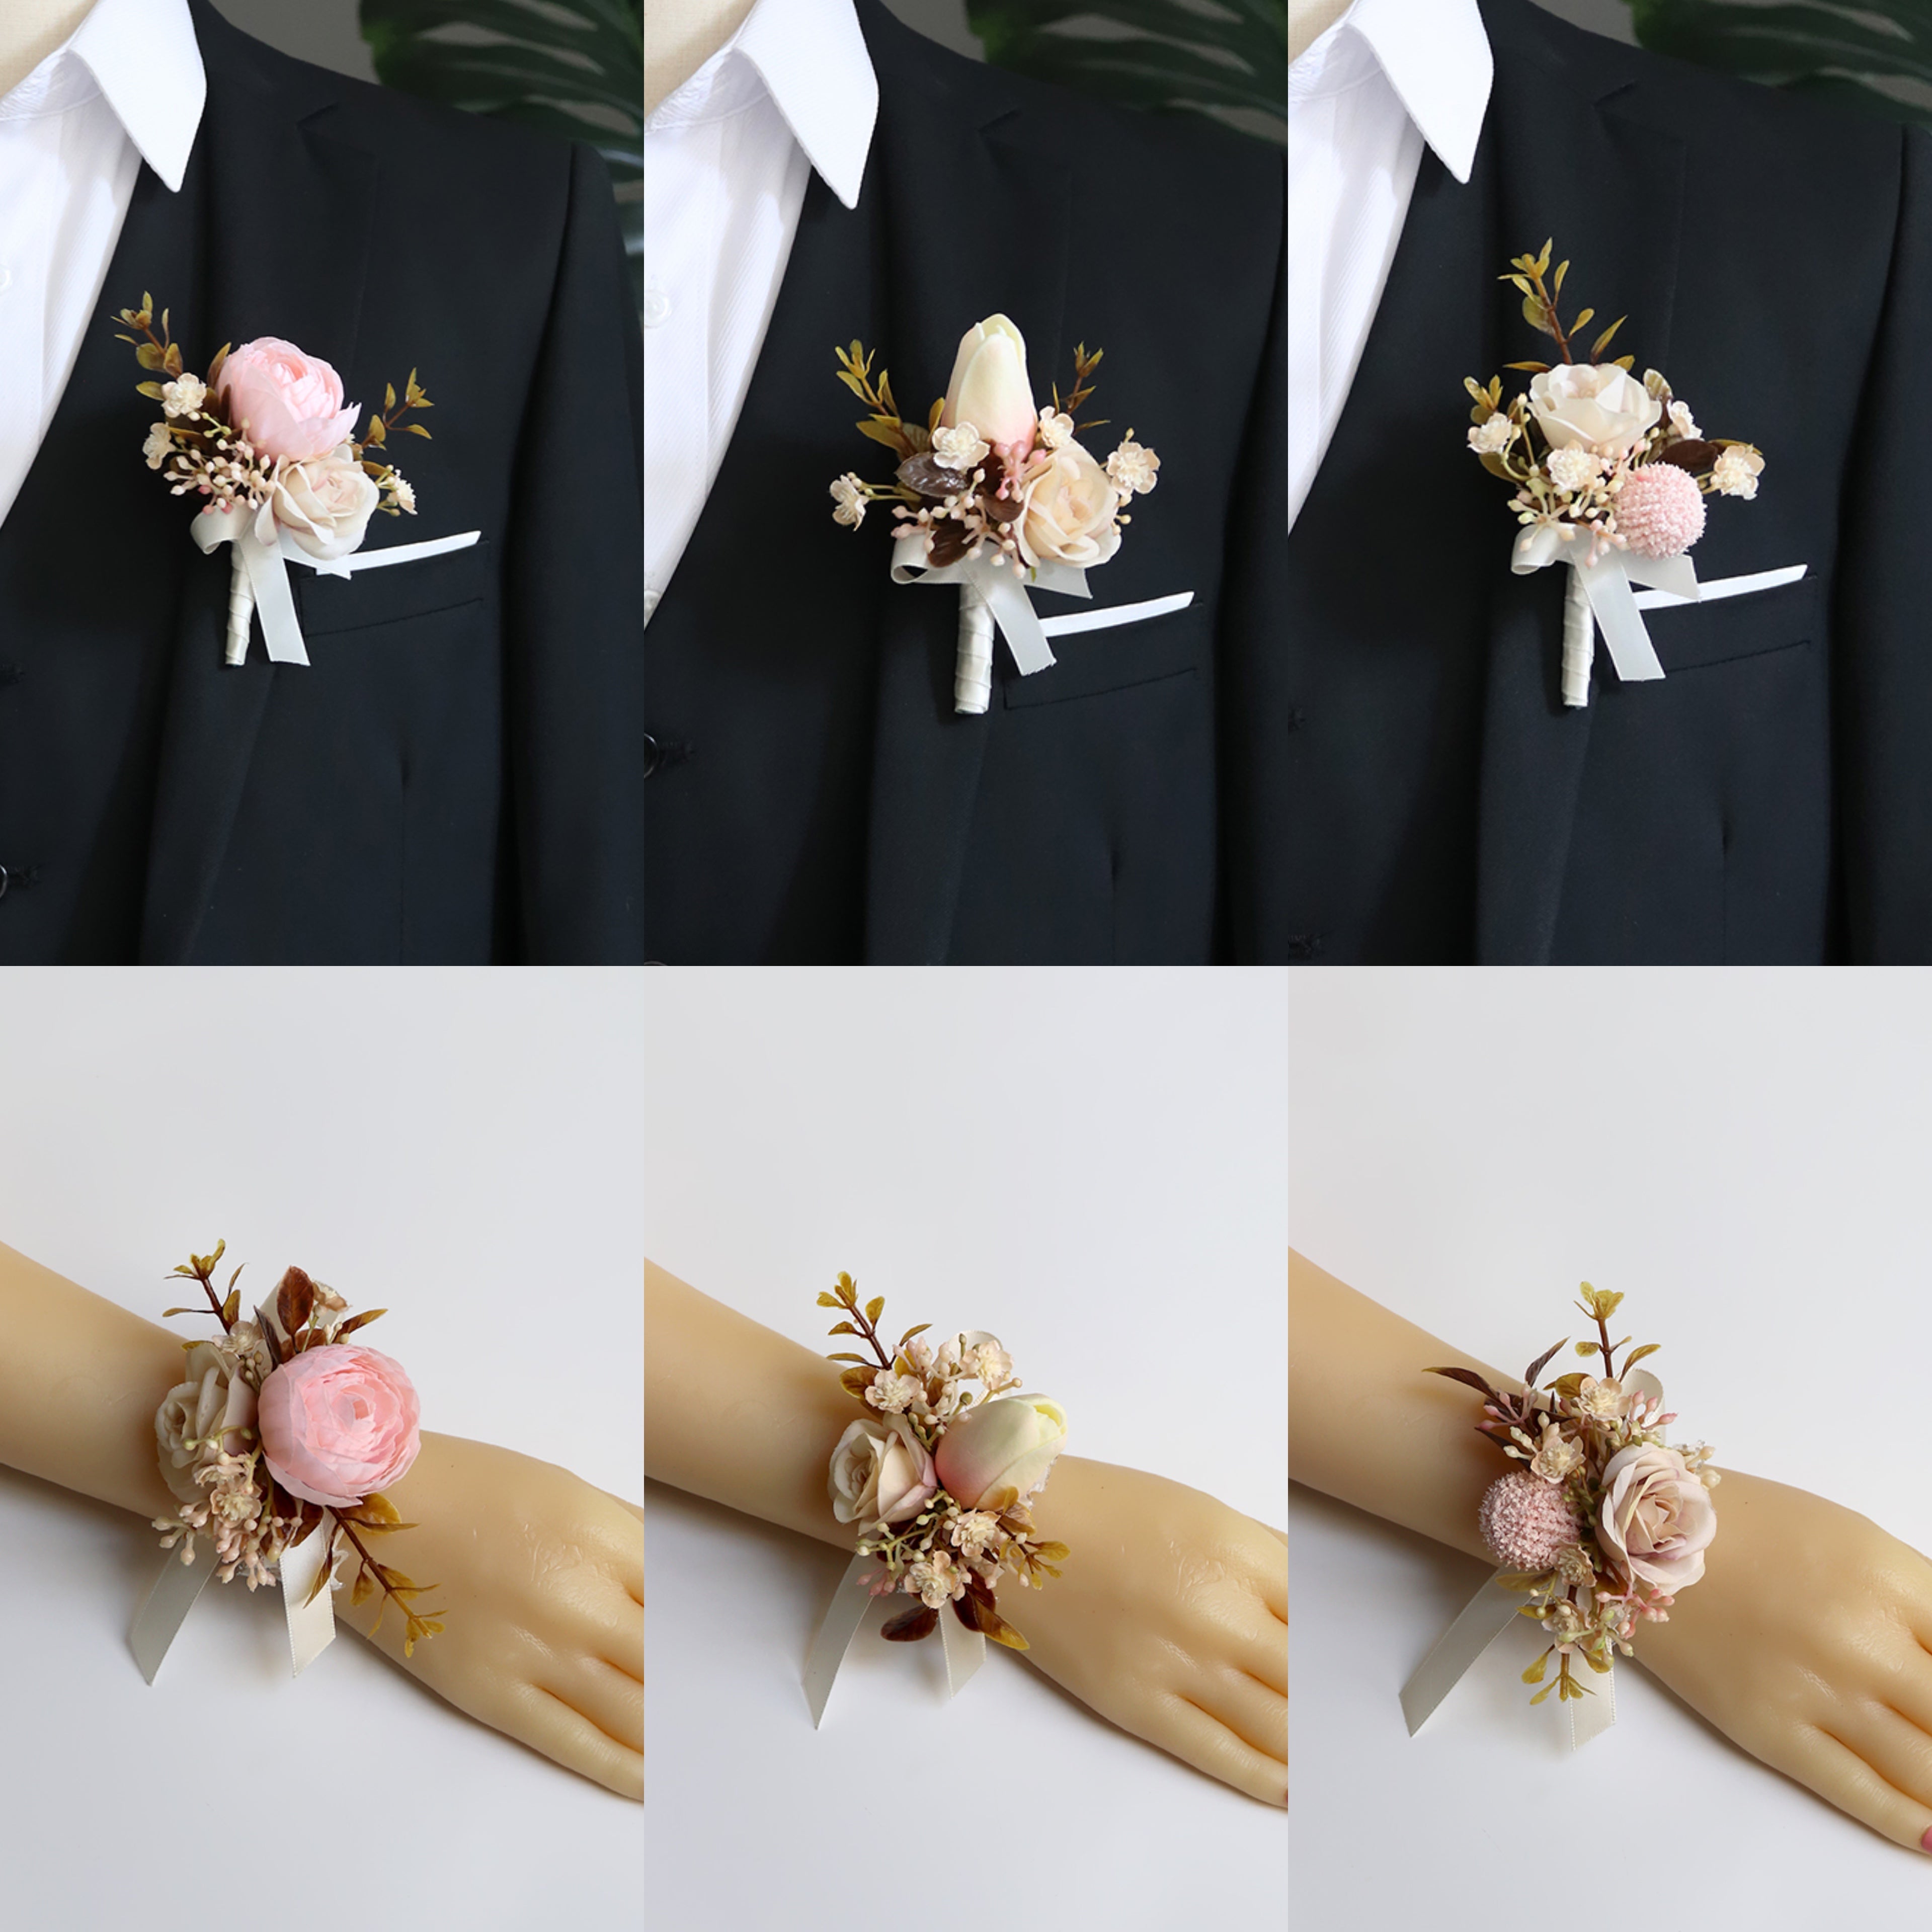 Wrist Flower Corsages Brown Series for Wedding Party Proposal Decor